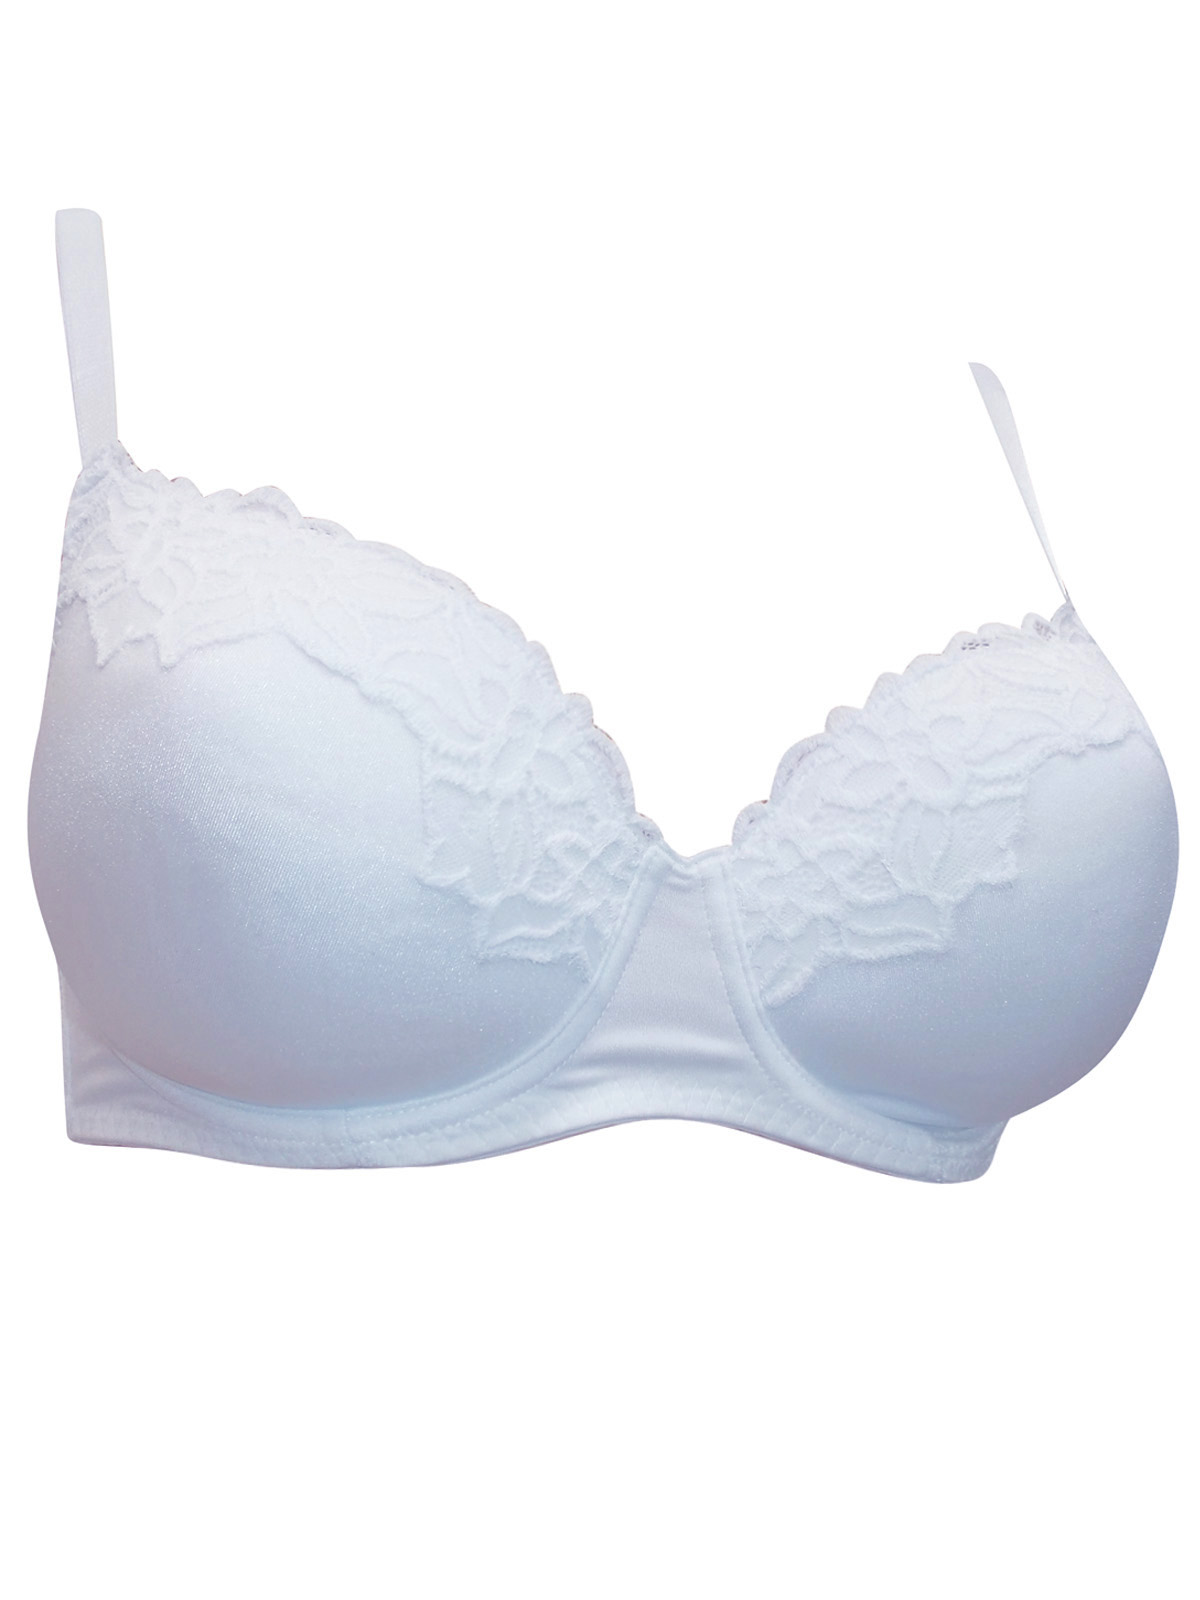 Trofe - - Trofé WHITE Floral Lace Underwired Bra - Size 34 to 38 (A-B-C-D)